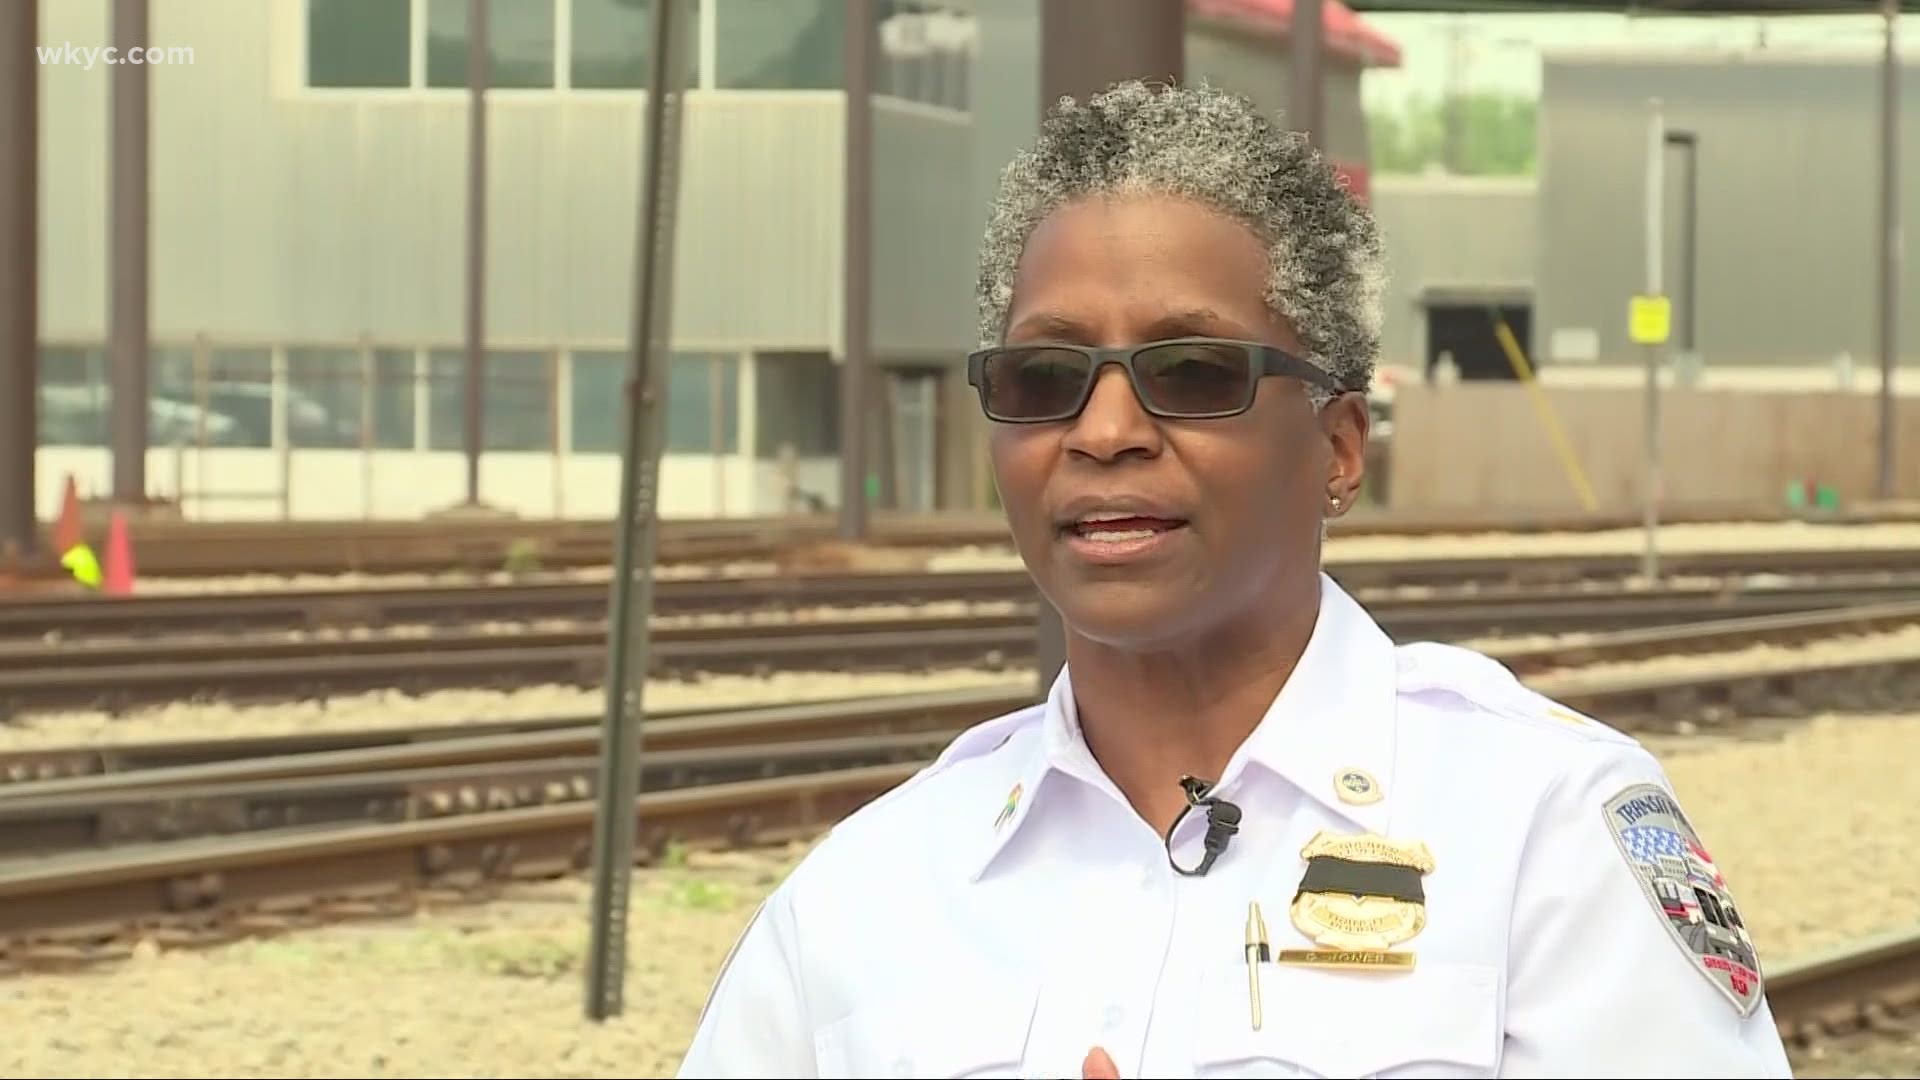 Trains are new to her, but police work is not. Deirdre Jones took the helm as the new RTA Transit Police Chief just last month after more than 30 years with CPD.